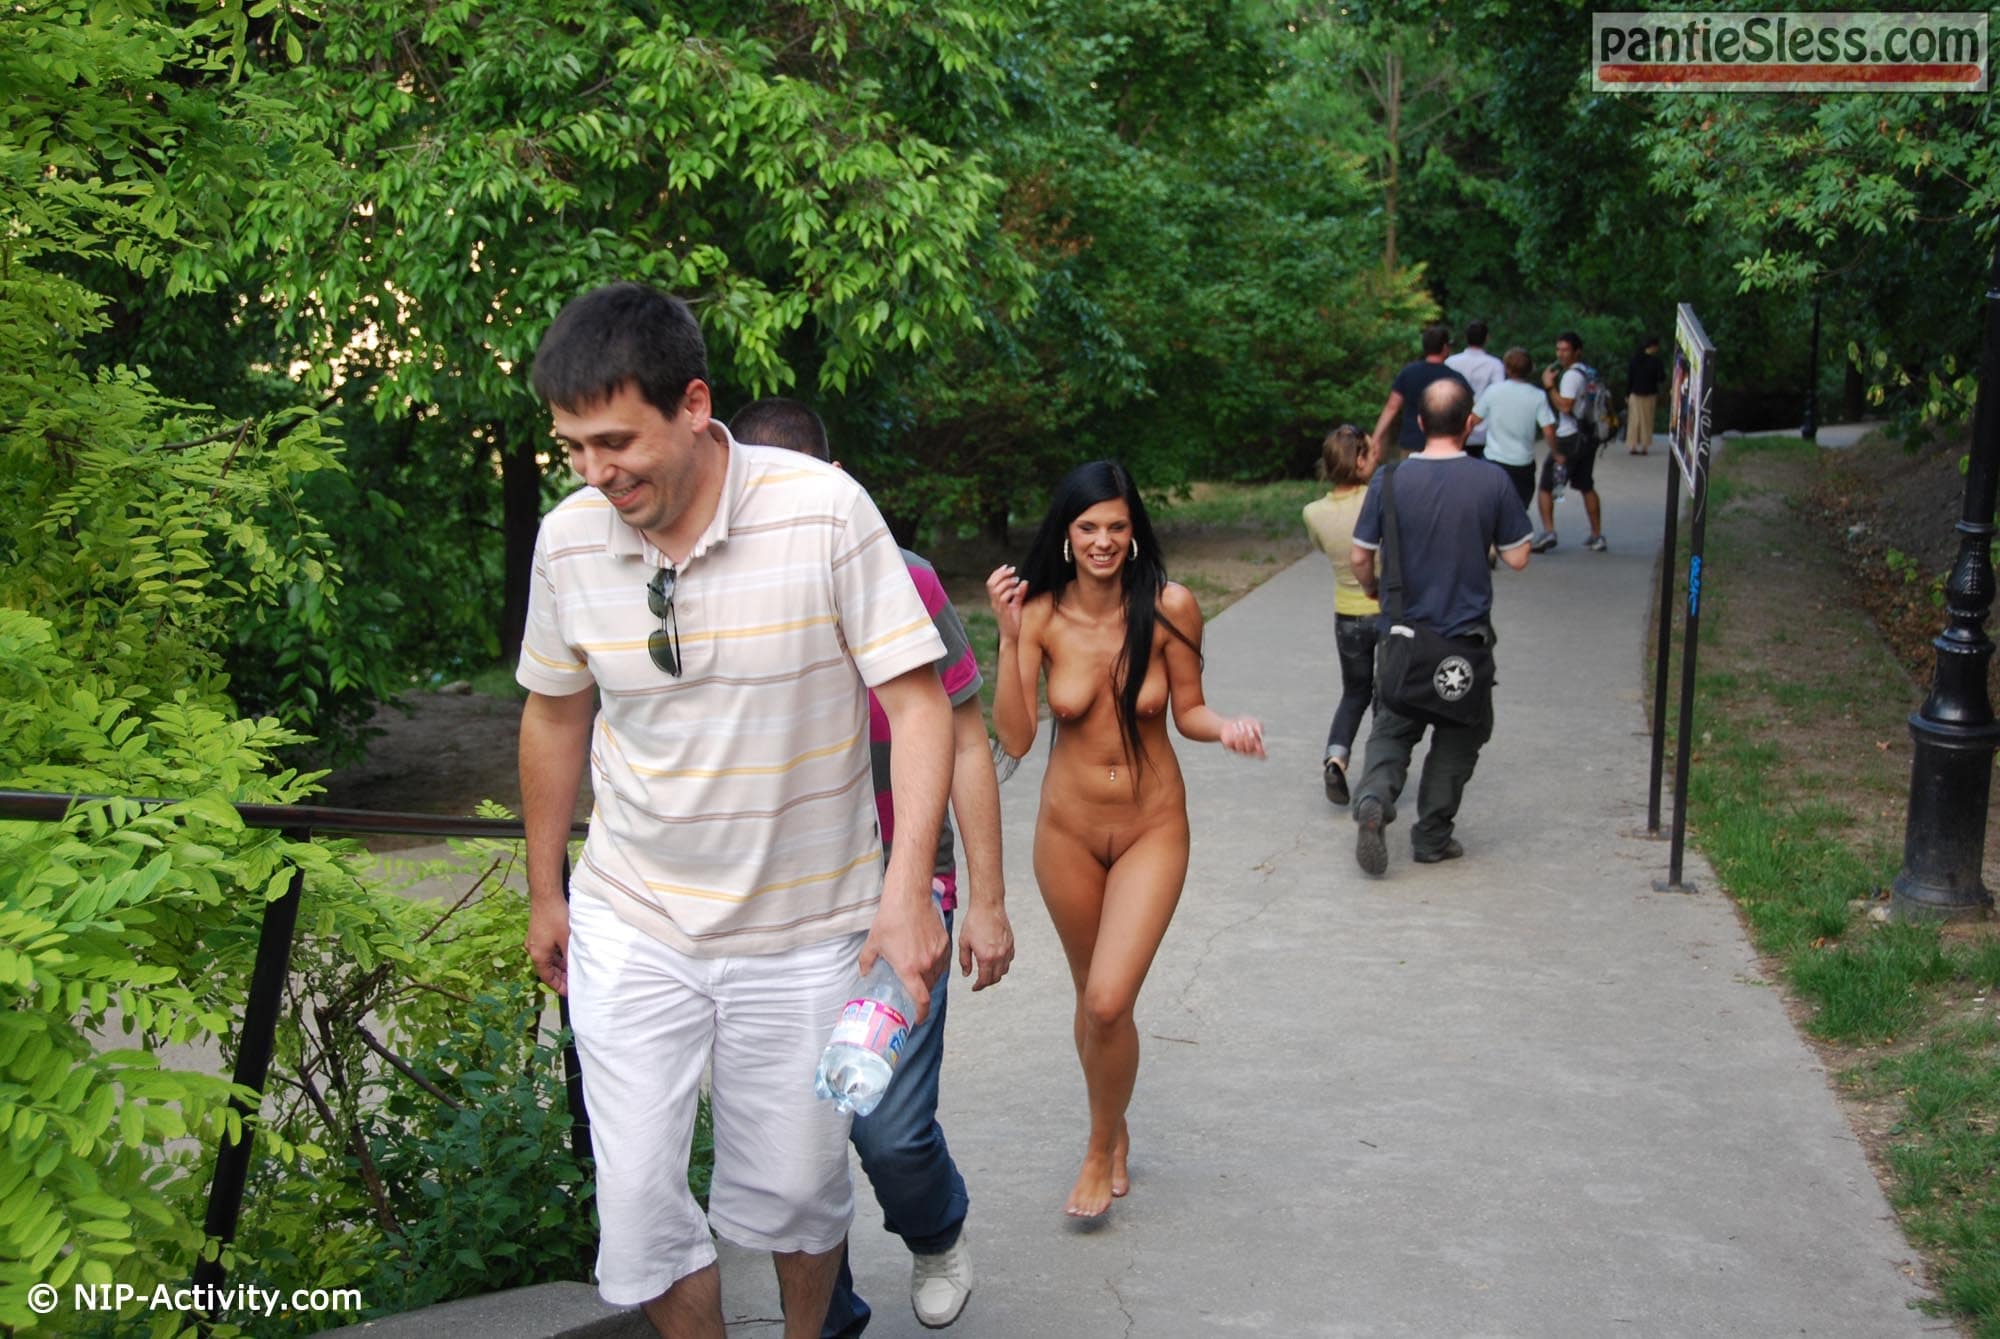 Dark haired fully nude goddess passing by tourists